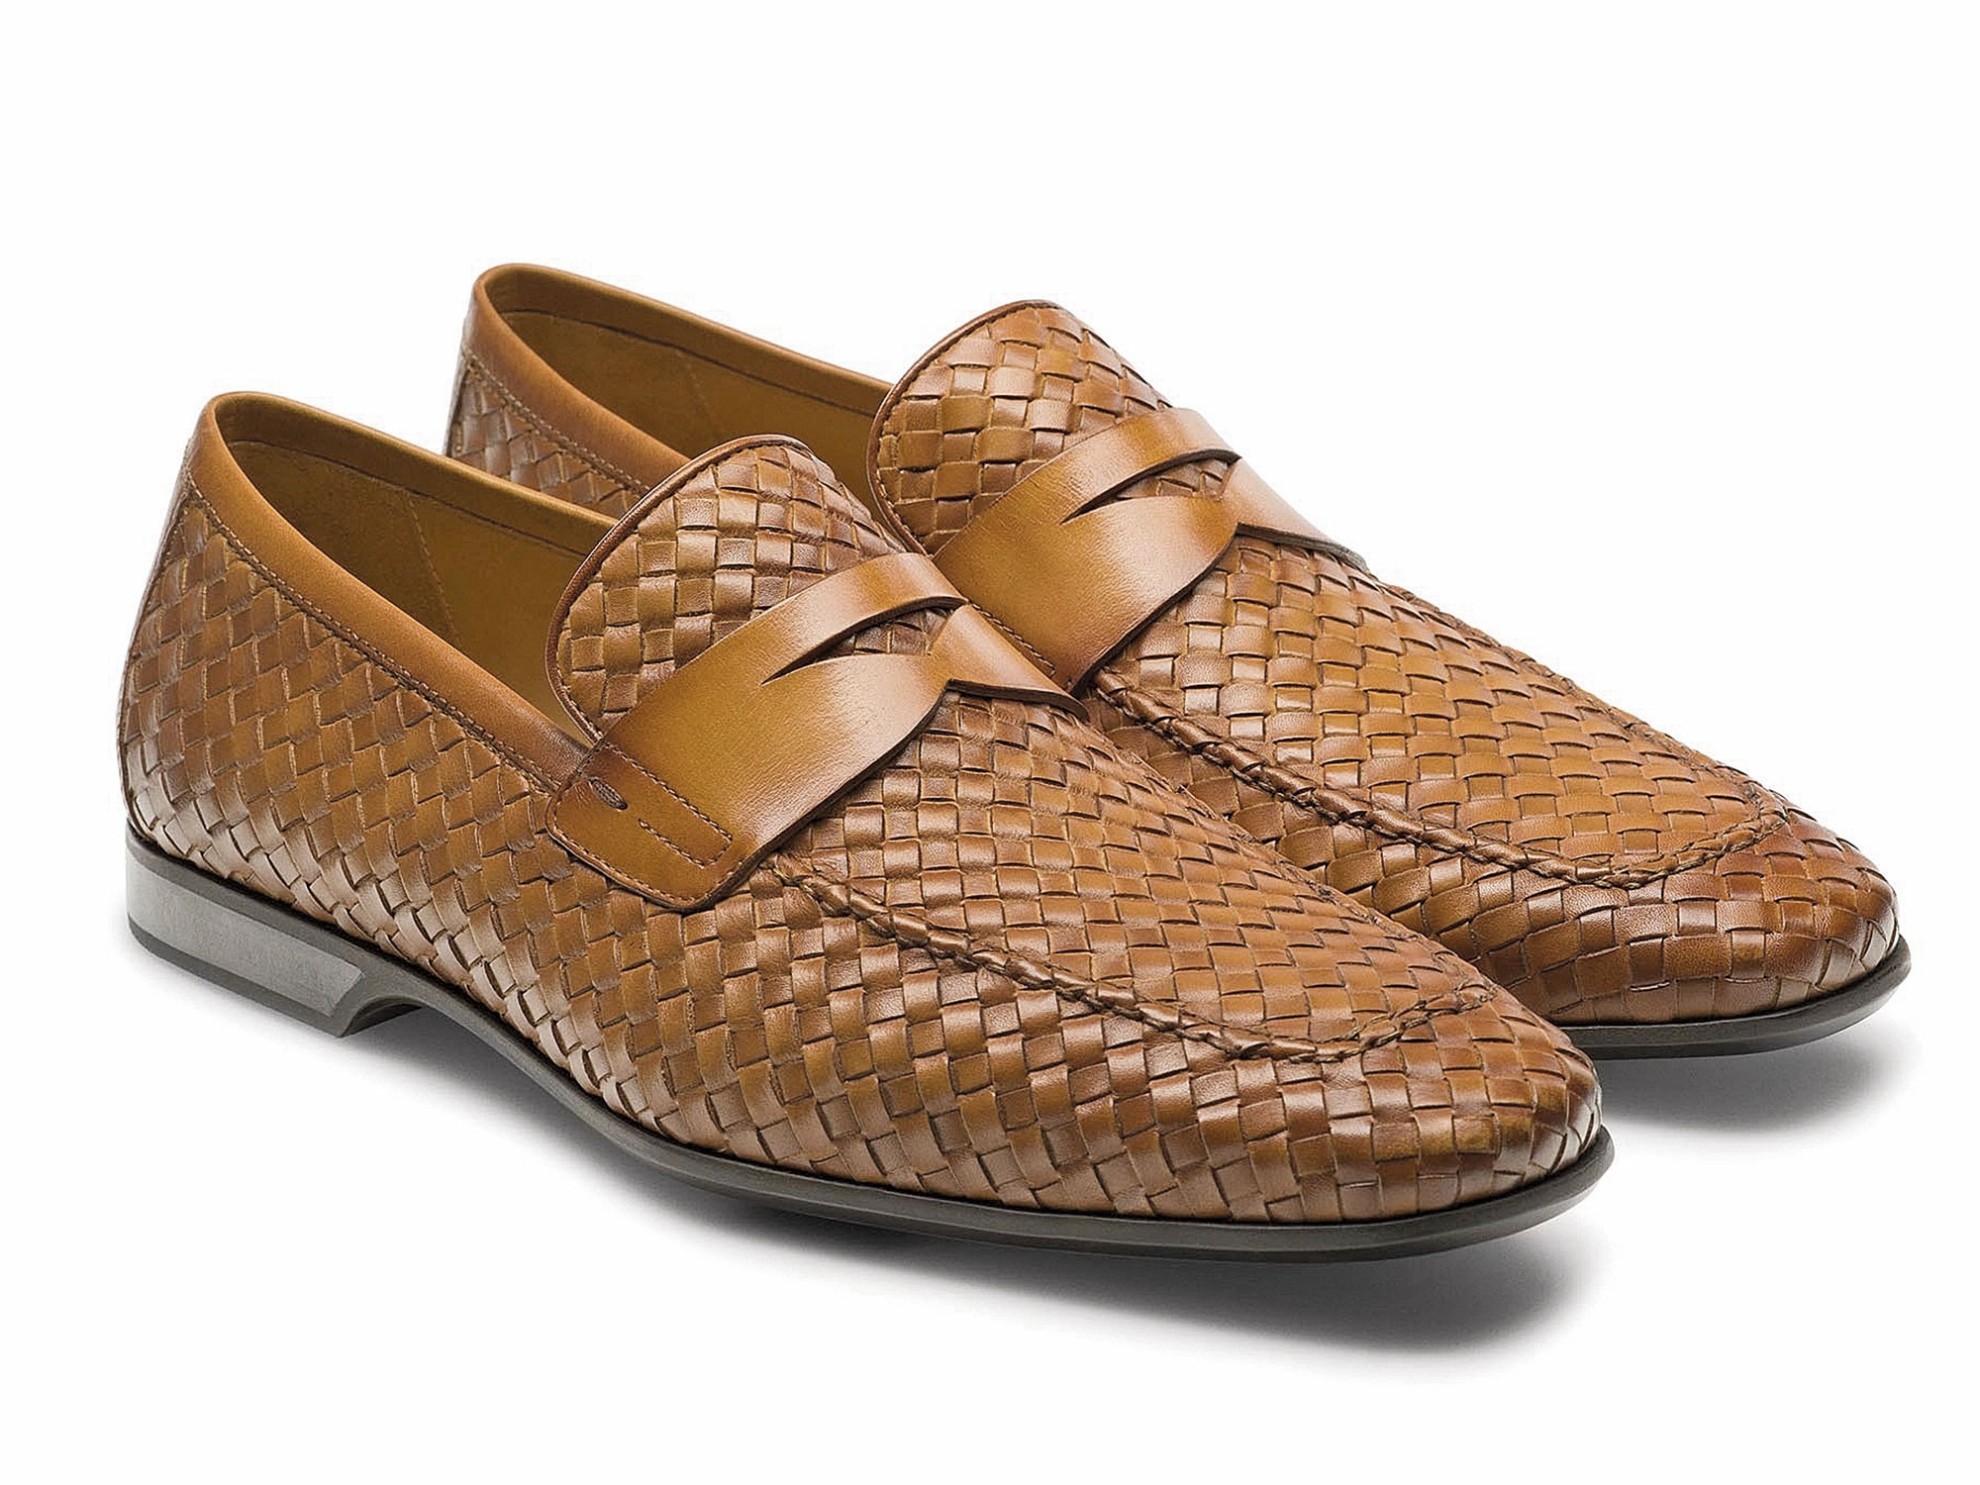 Casual moccasins: Relaxed and comfortable